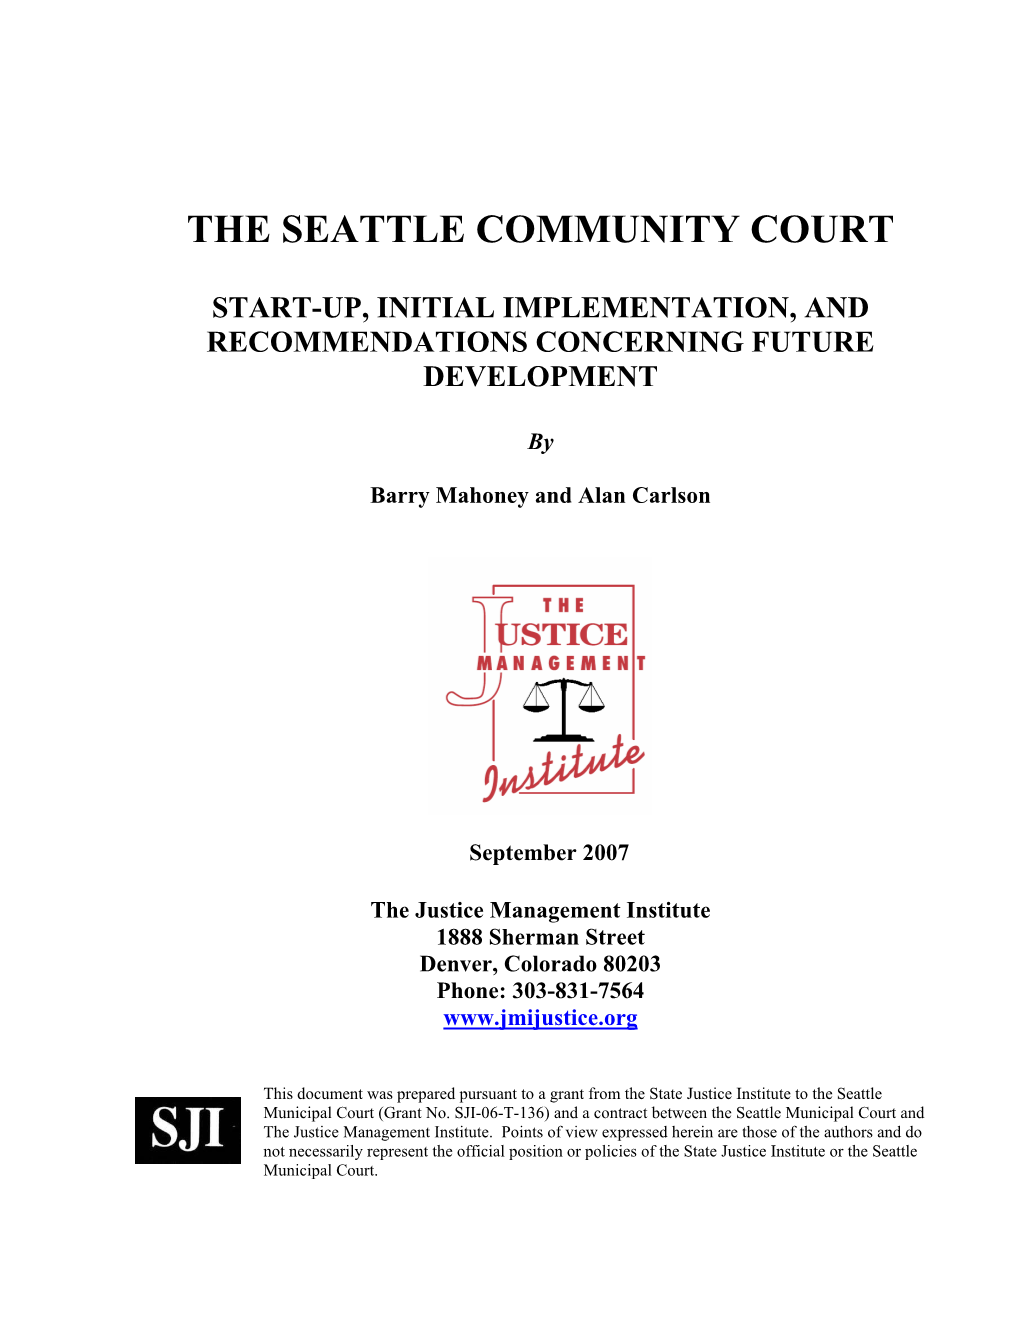 The Seattle Community Court